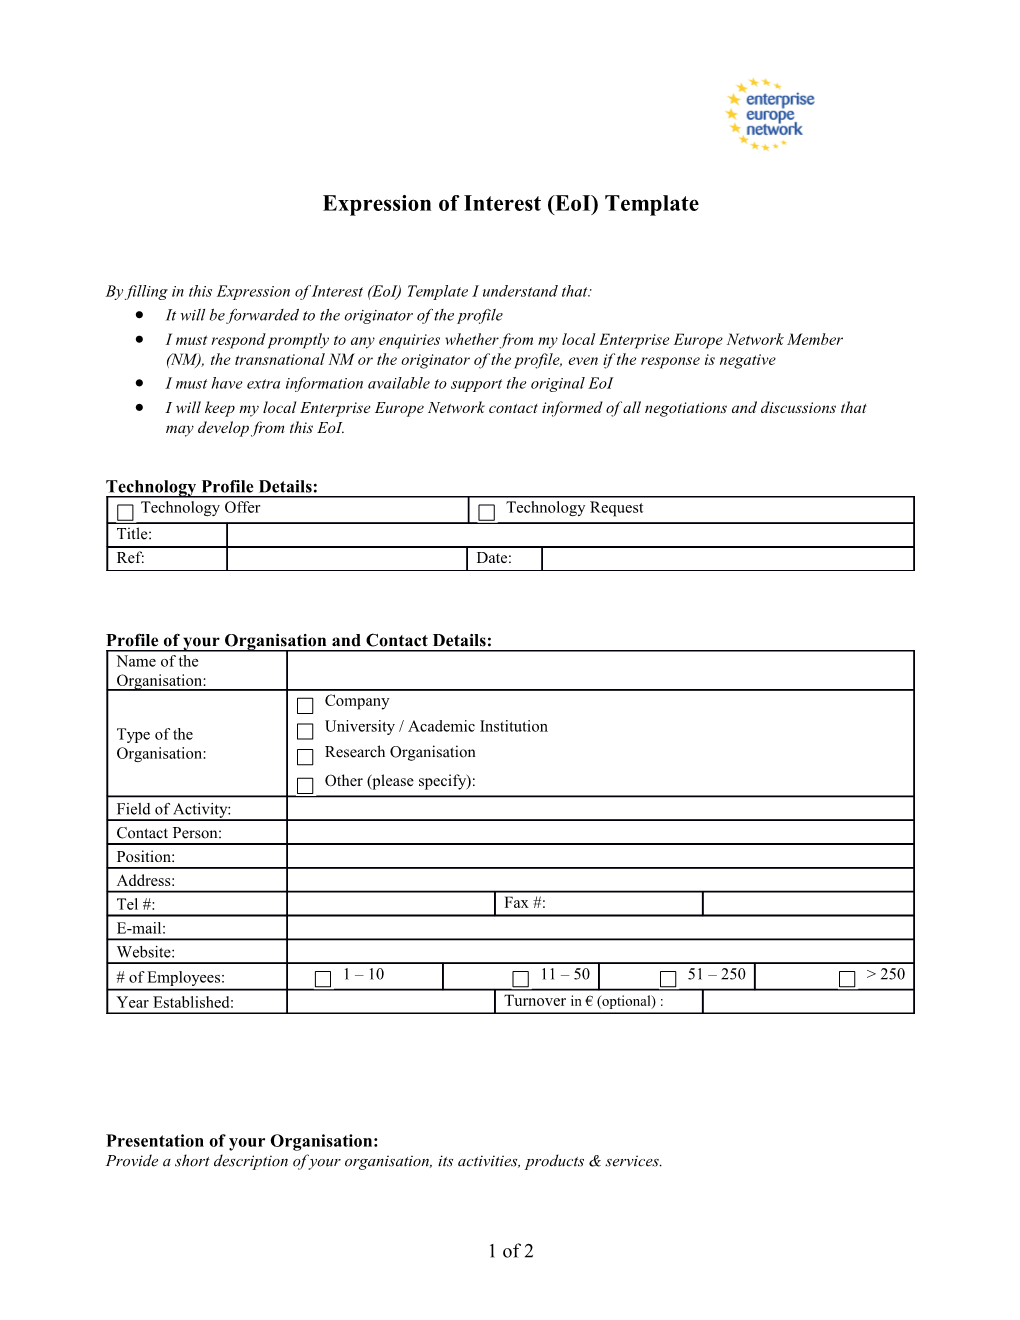 By Filling in This Expression of Interest (Eoi) Template I Understand That